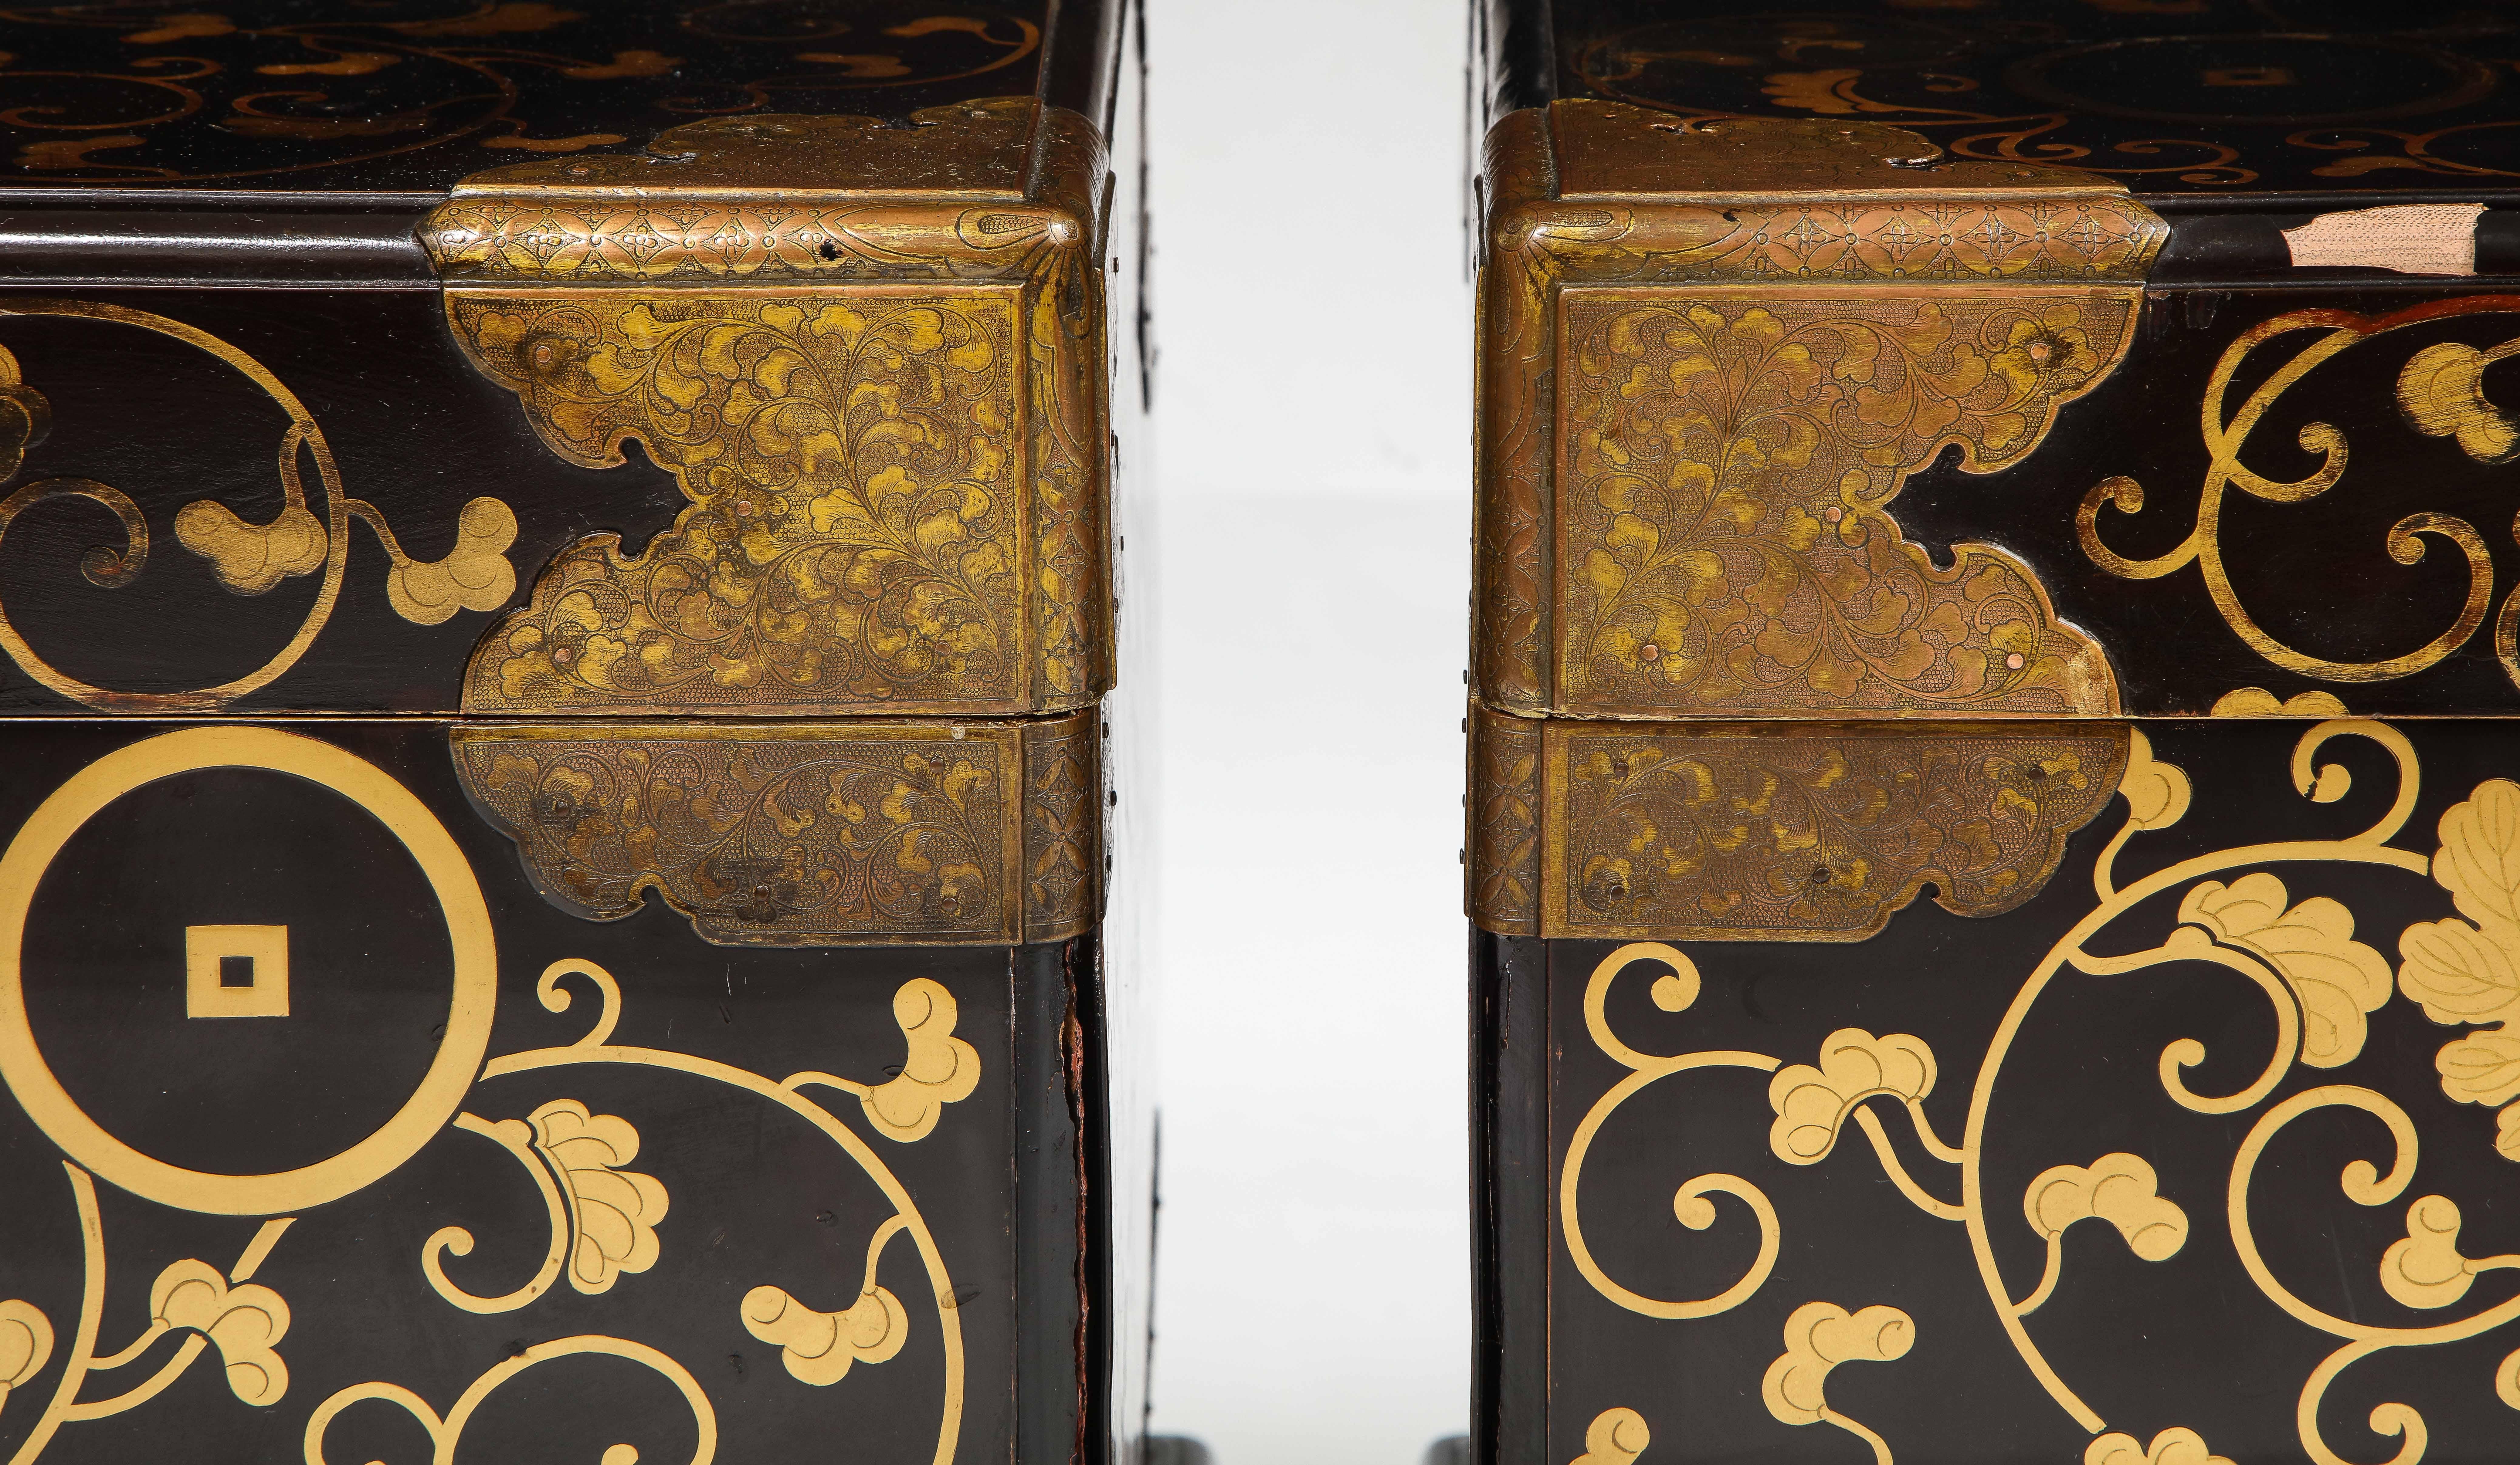  Pair of 19th Century Japanese Meiji Period Dore Bronze Mounted Lacquered Chests For Sale 7